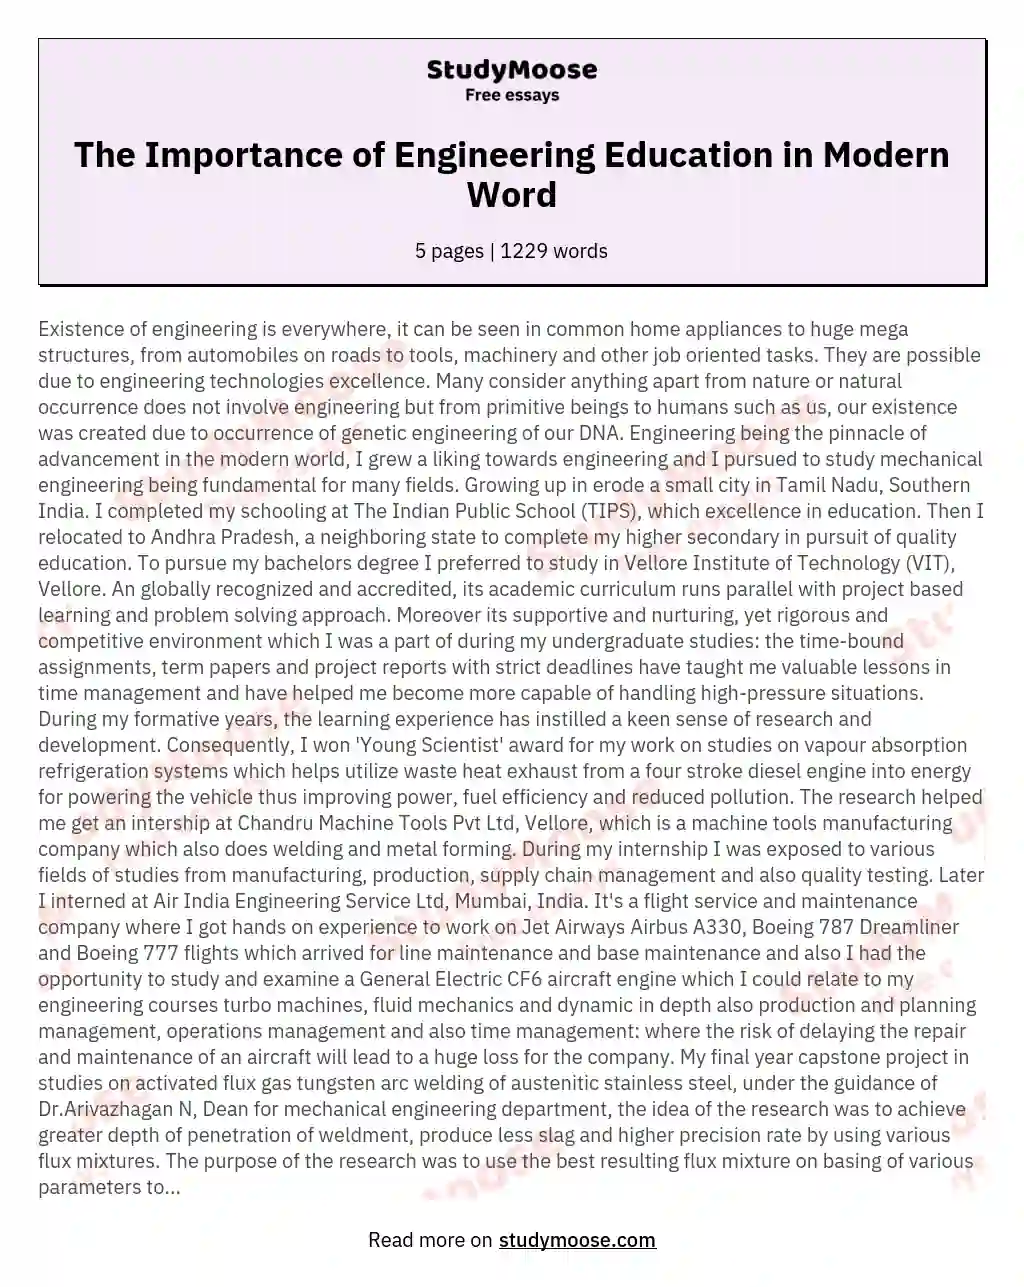 The Importance of Engineering Education in Modern Word essay